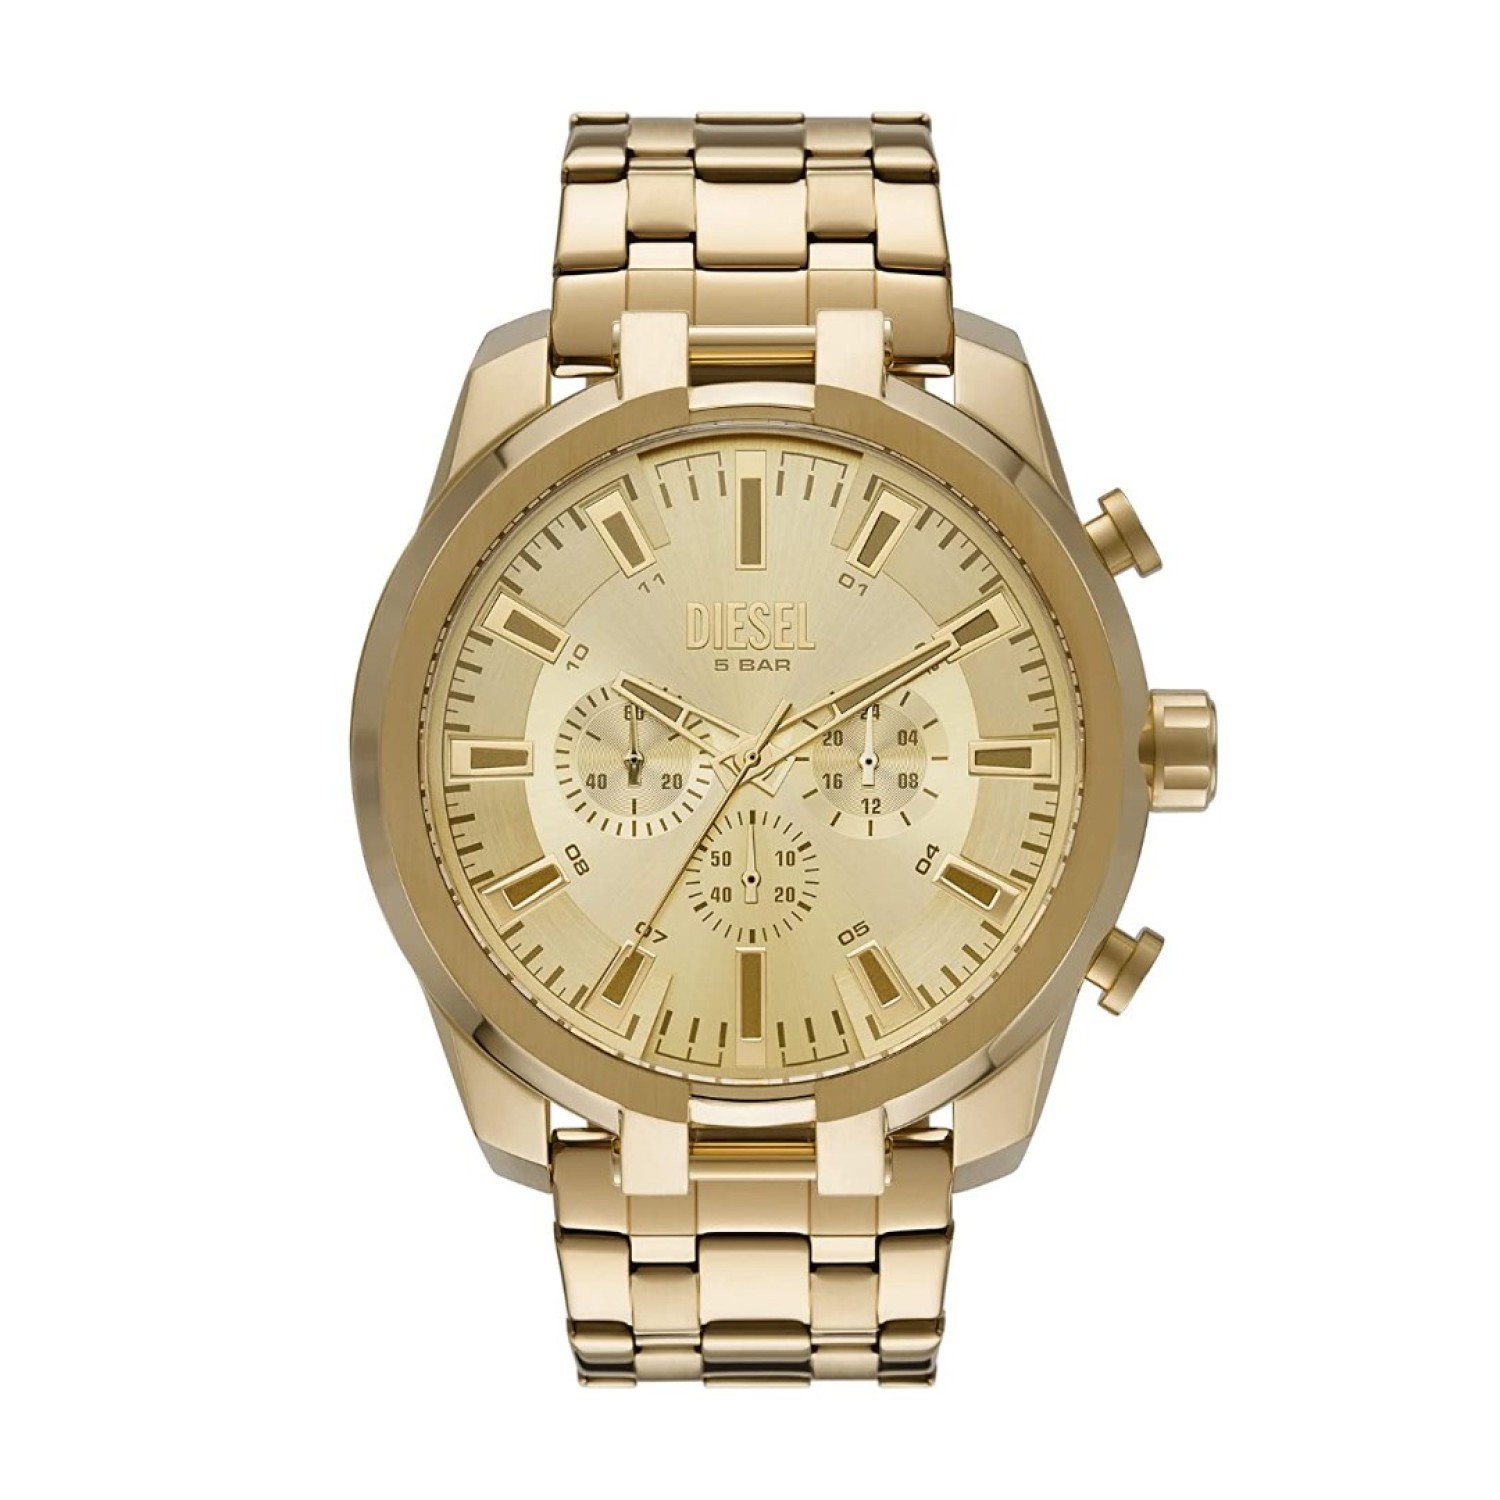 DZ4590-DIESEL SPLIT CHRONOGRAPH GOLD-TONE STAINLESS STEEL BRACELET. This 51mm DZ4590 watch features a gold dial with stick indexes, three-hand movement and gold-tone stainless steel bracelet.